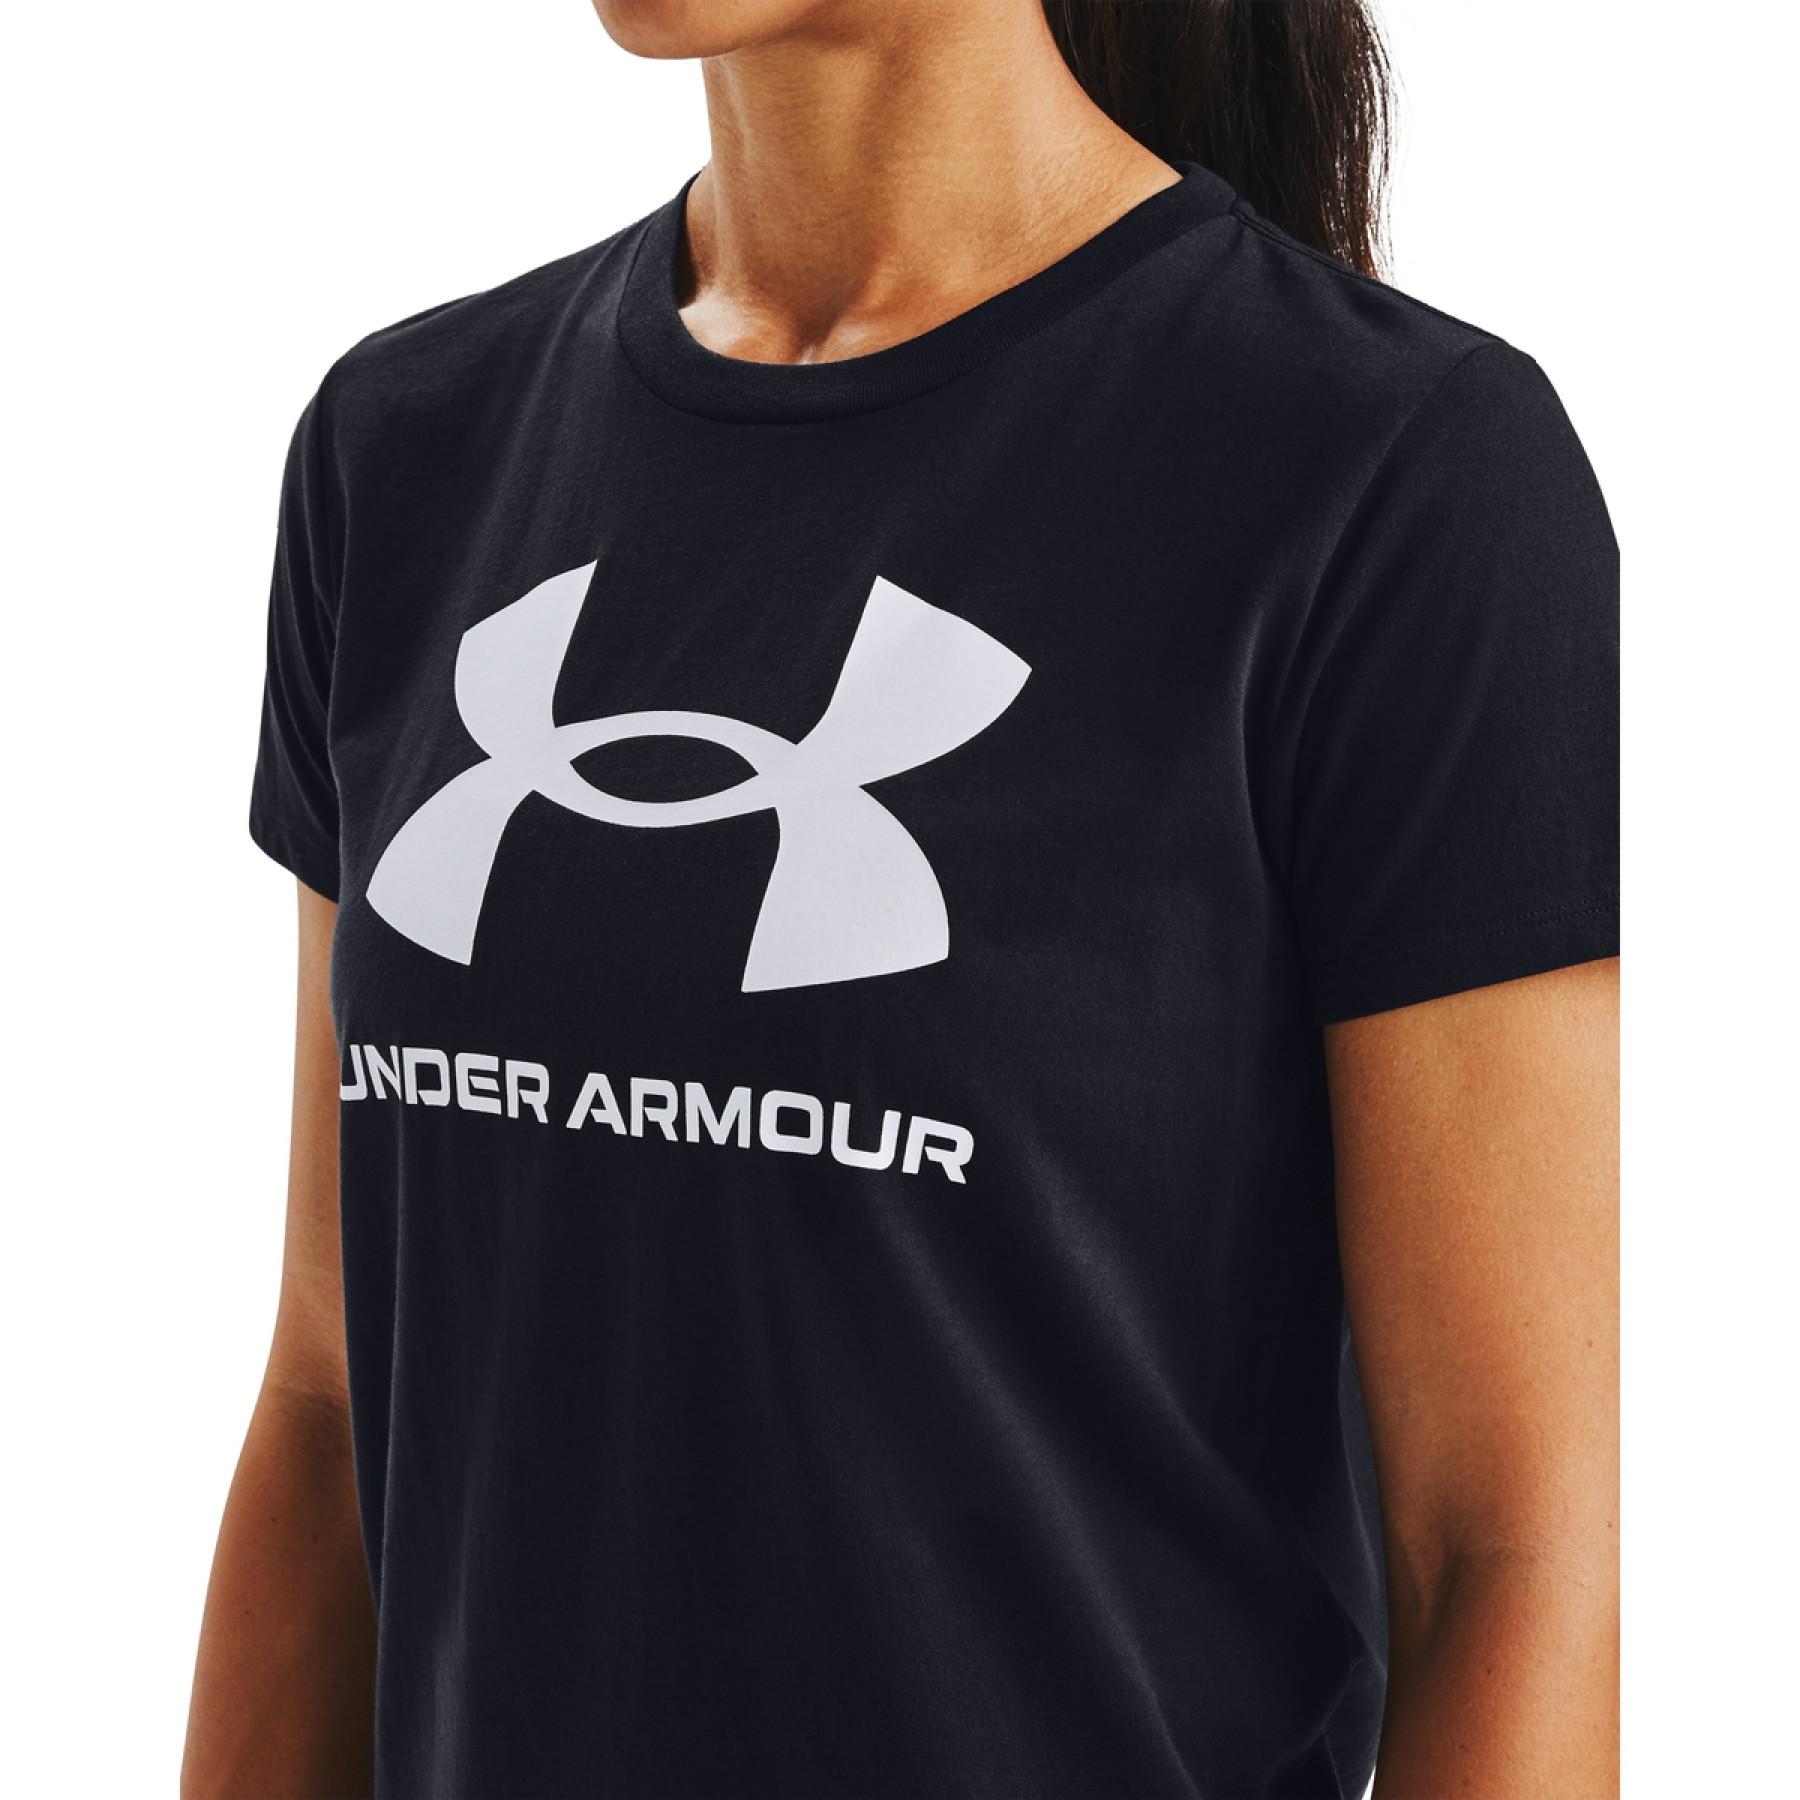 Women's T-shirt Under Armour Live Sportstyle Graphic